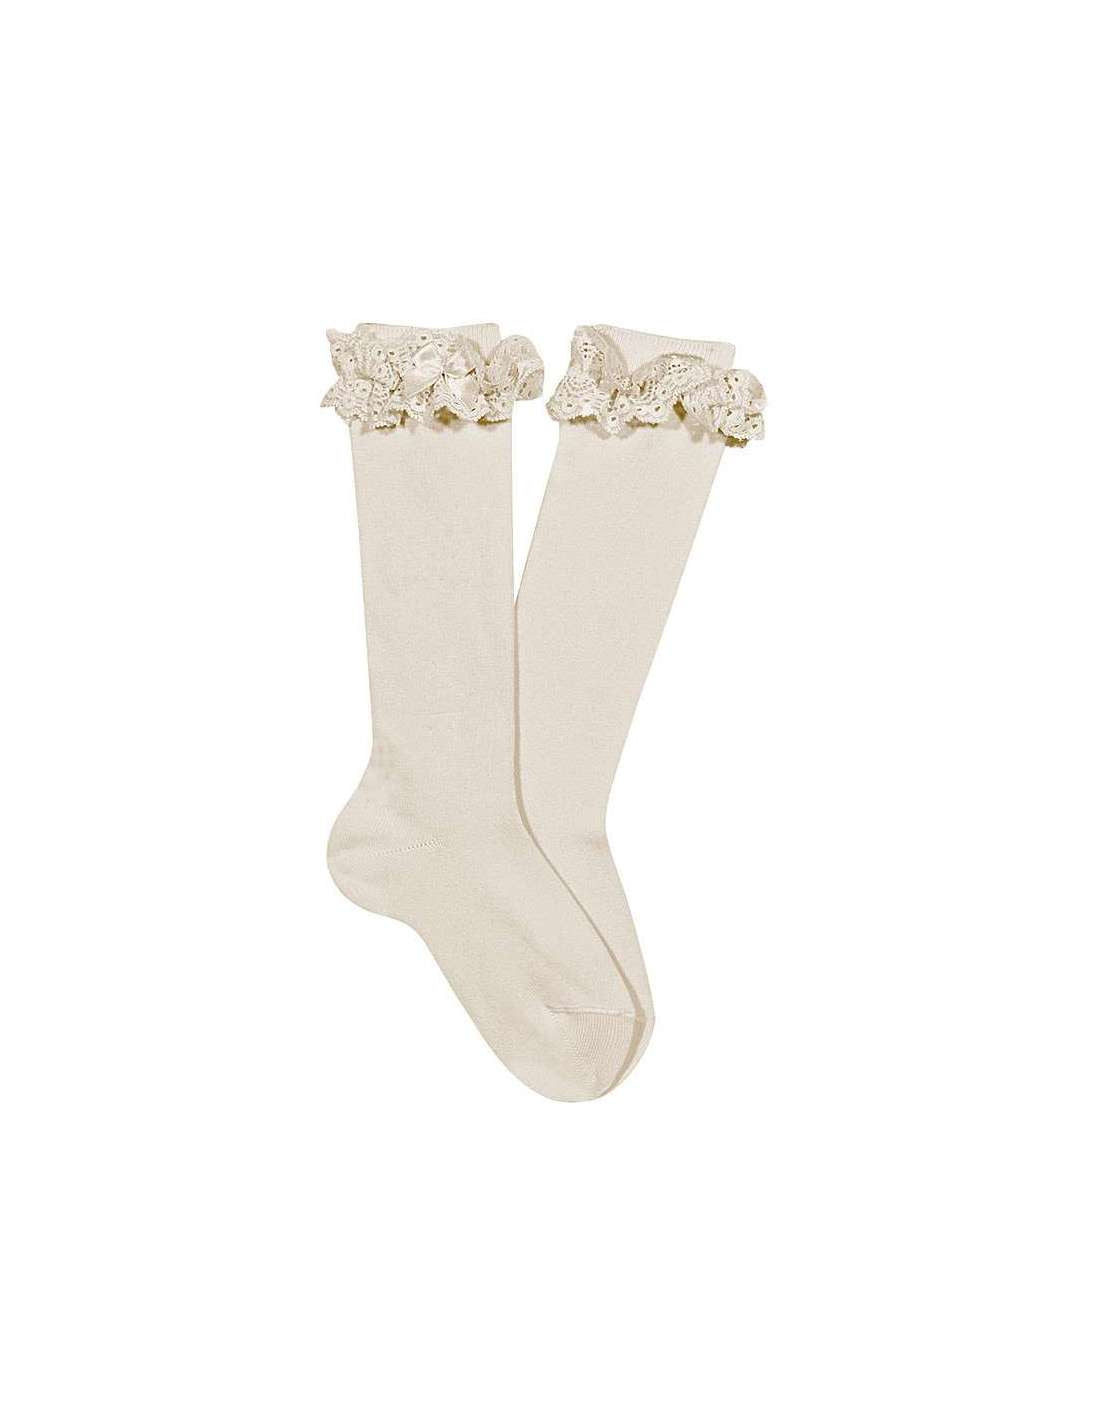 Condor Knee High Sock with Lace & Bow